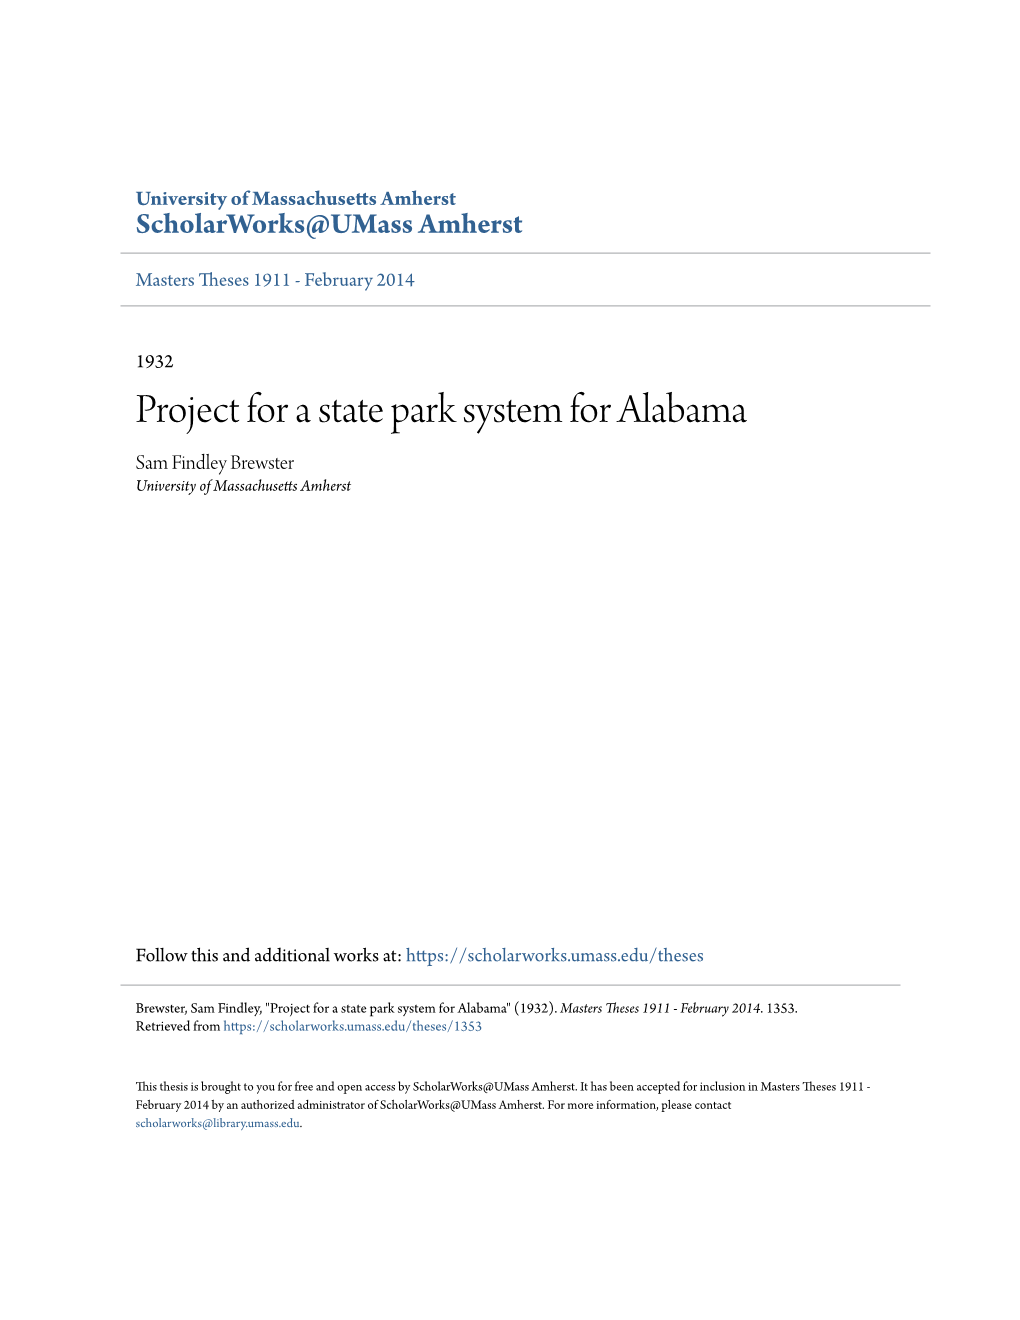 Project for a State Park System for Alabama Sam Findley Brewster University of Massachusetts Amherst